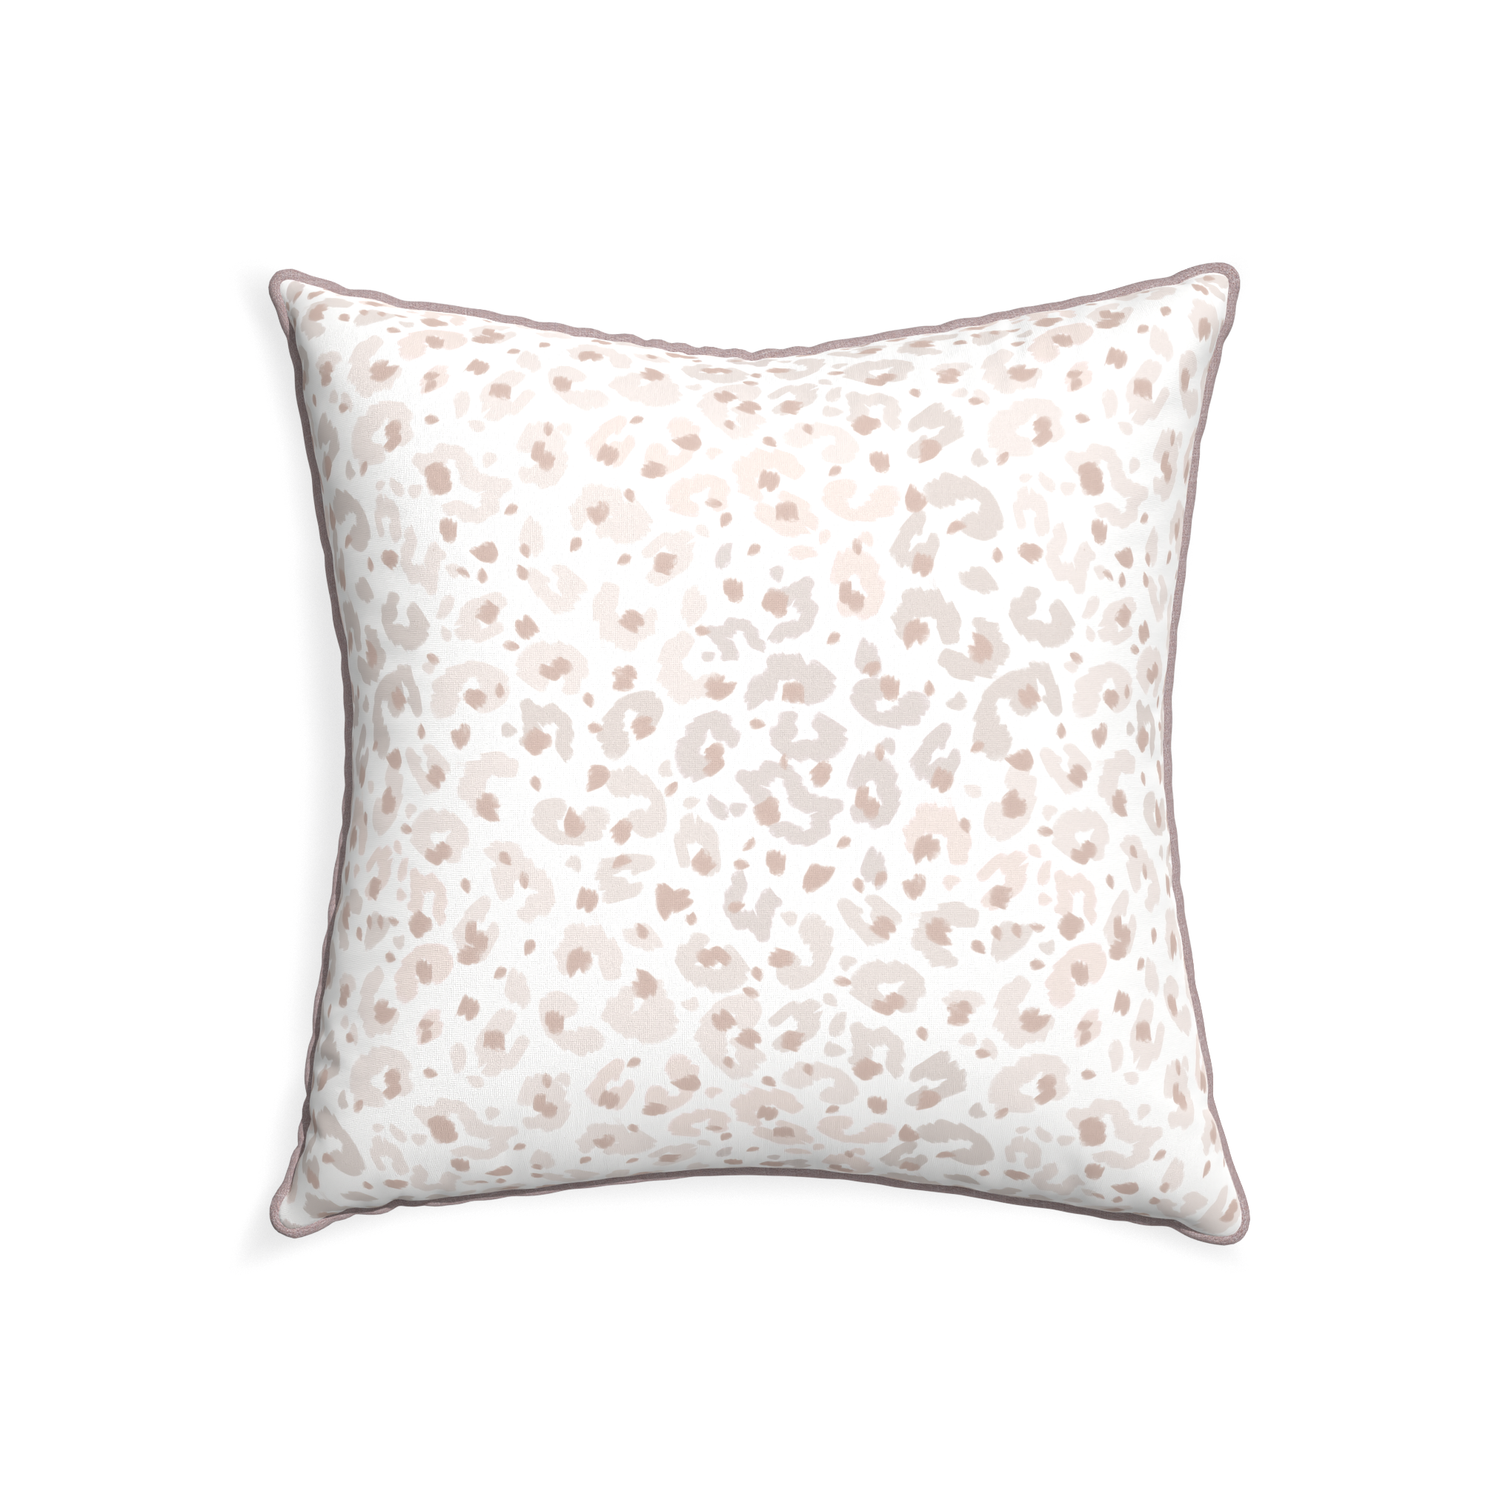 22-square rosie custom beige animal printpillow with orchid piping on white background